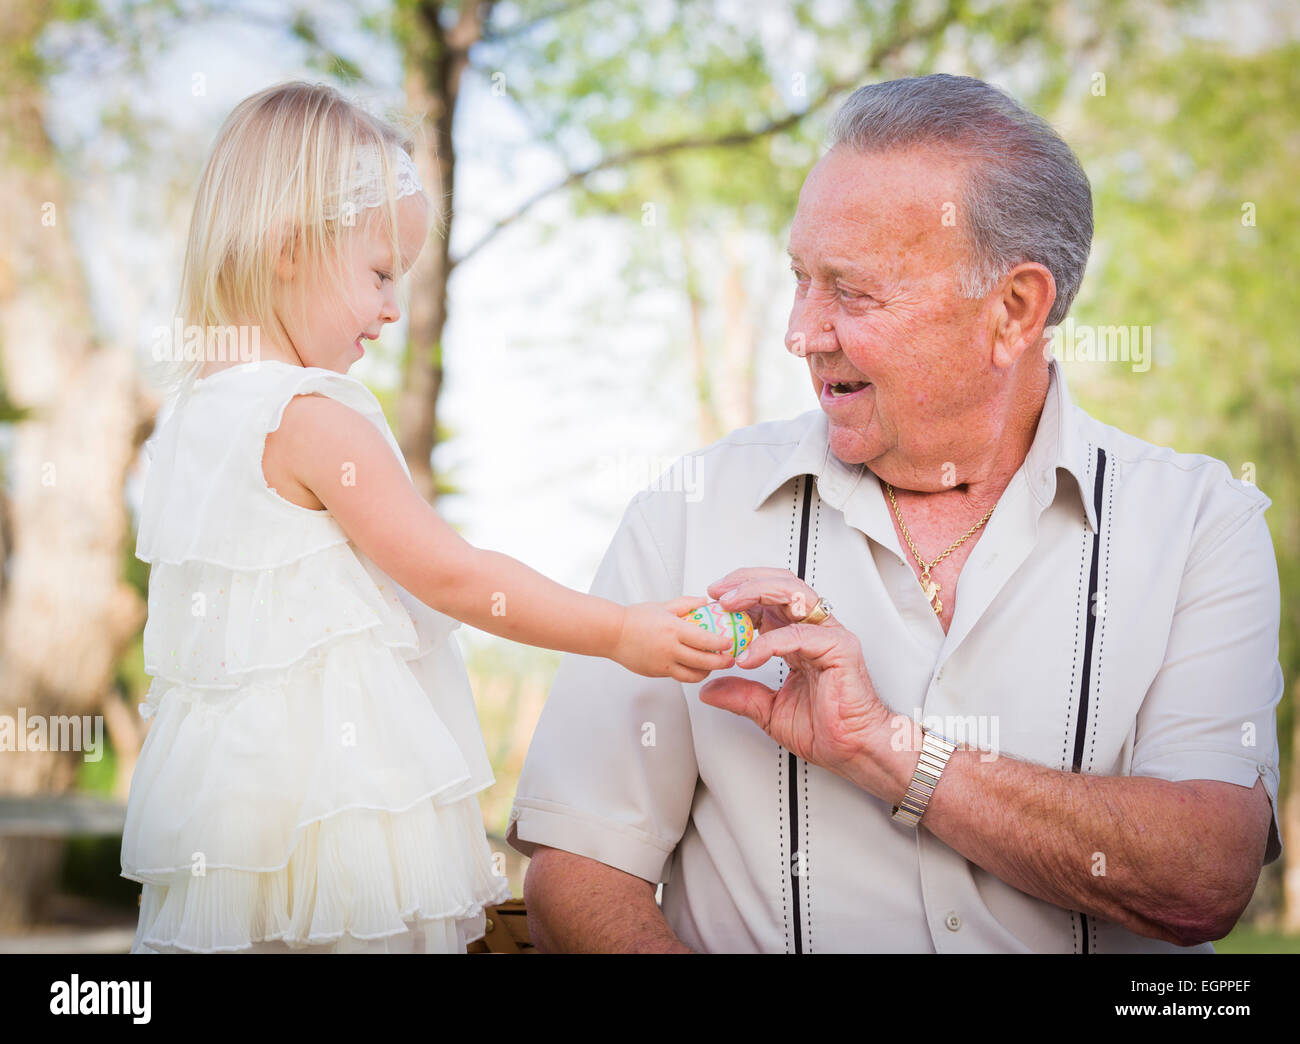 Cute Baby Girl Handing Easter Egg to Grandfather Outside at the Park. Stock Photo